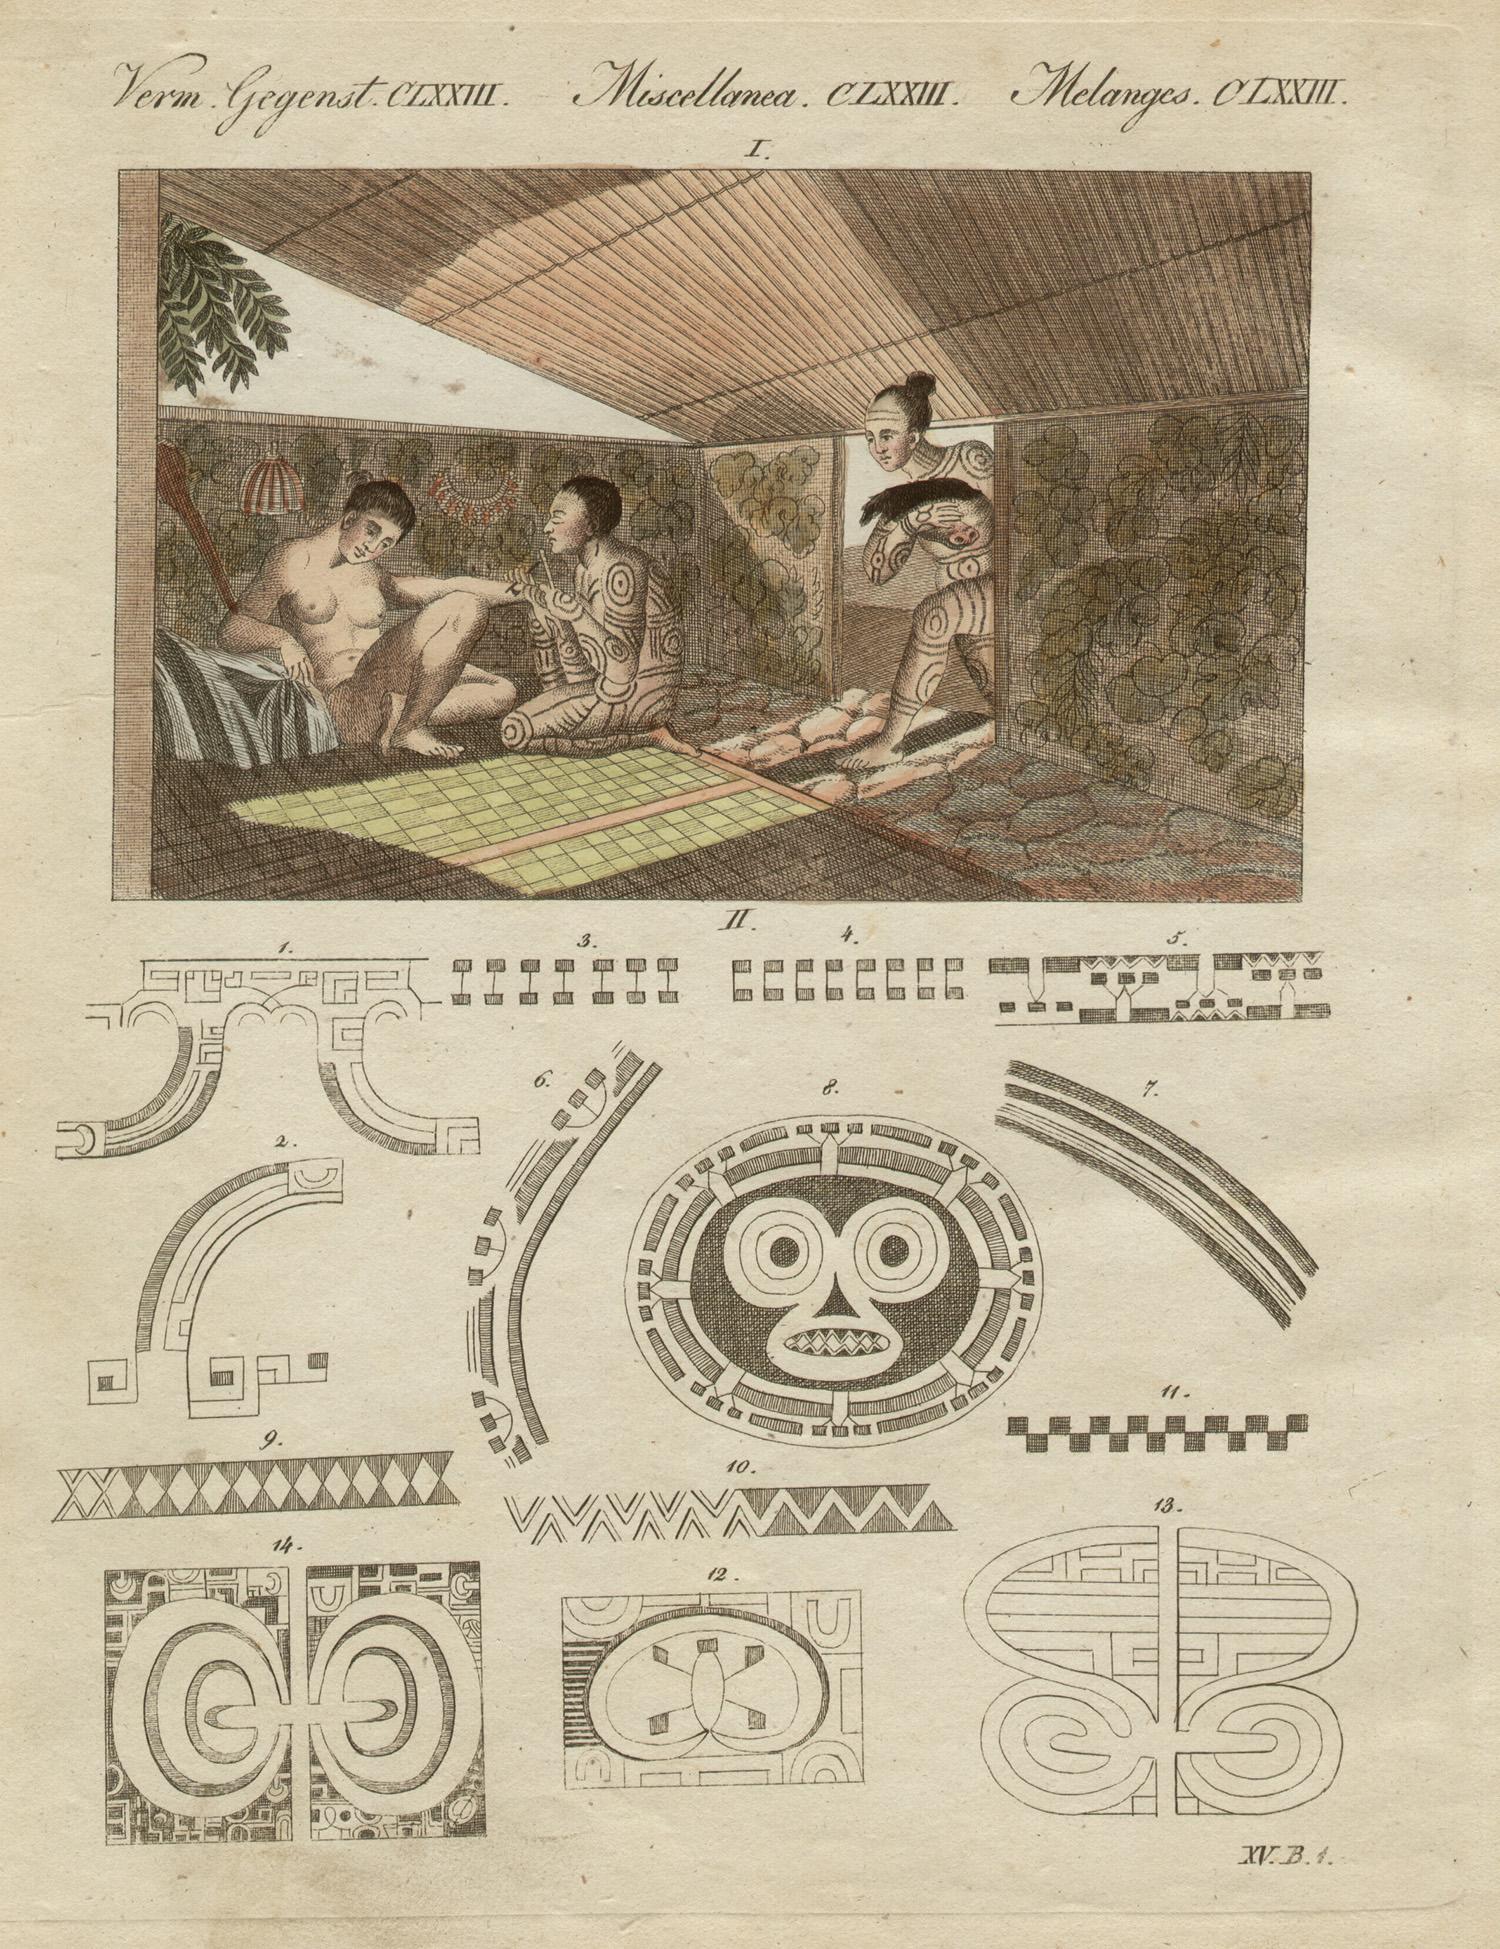 The Art of Tattooing in Nuka, engraving with original hand-colouring, circa 1815